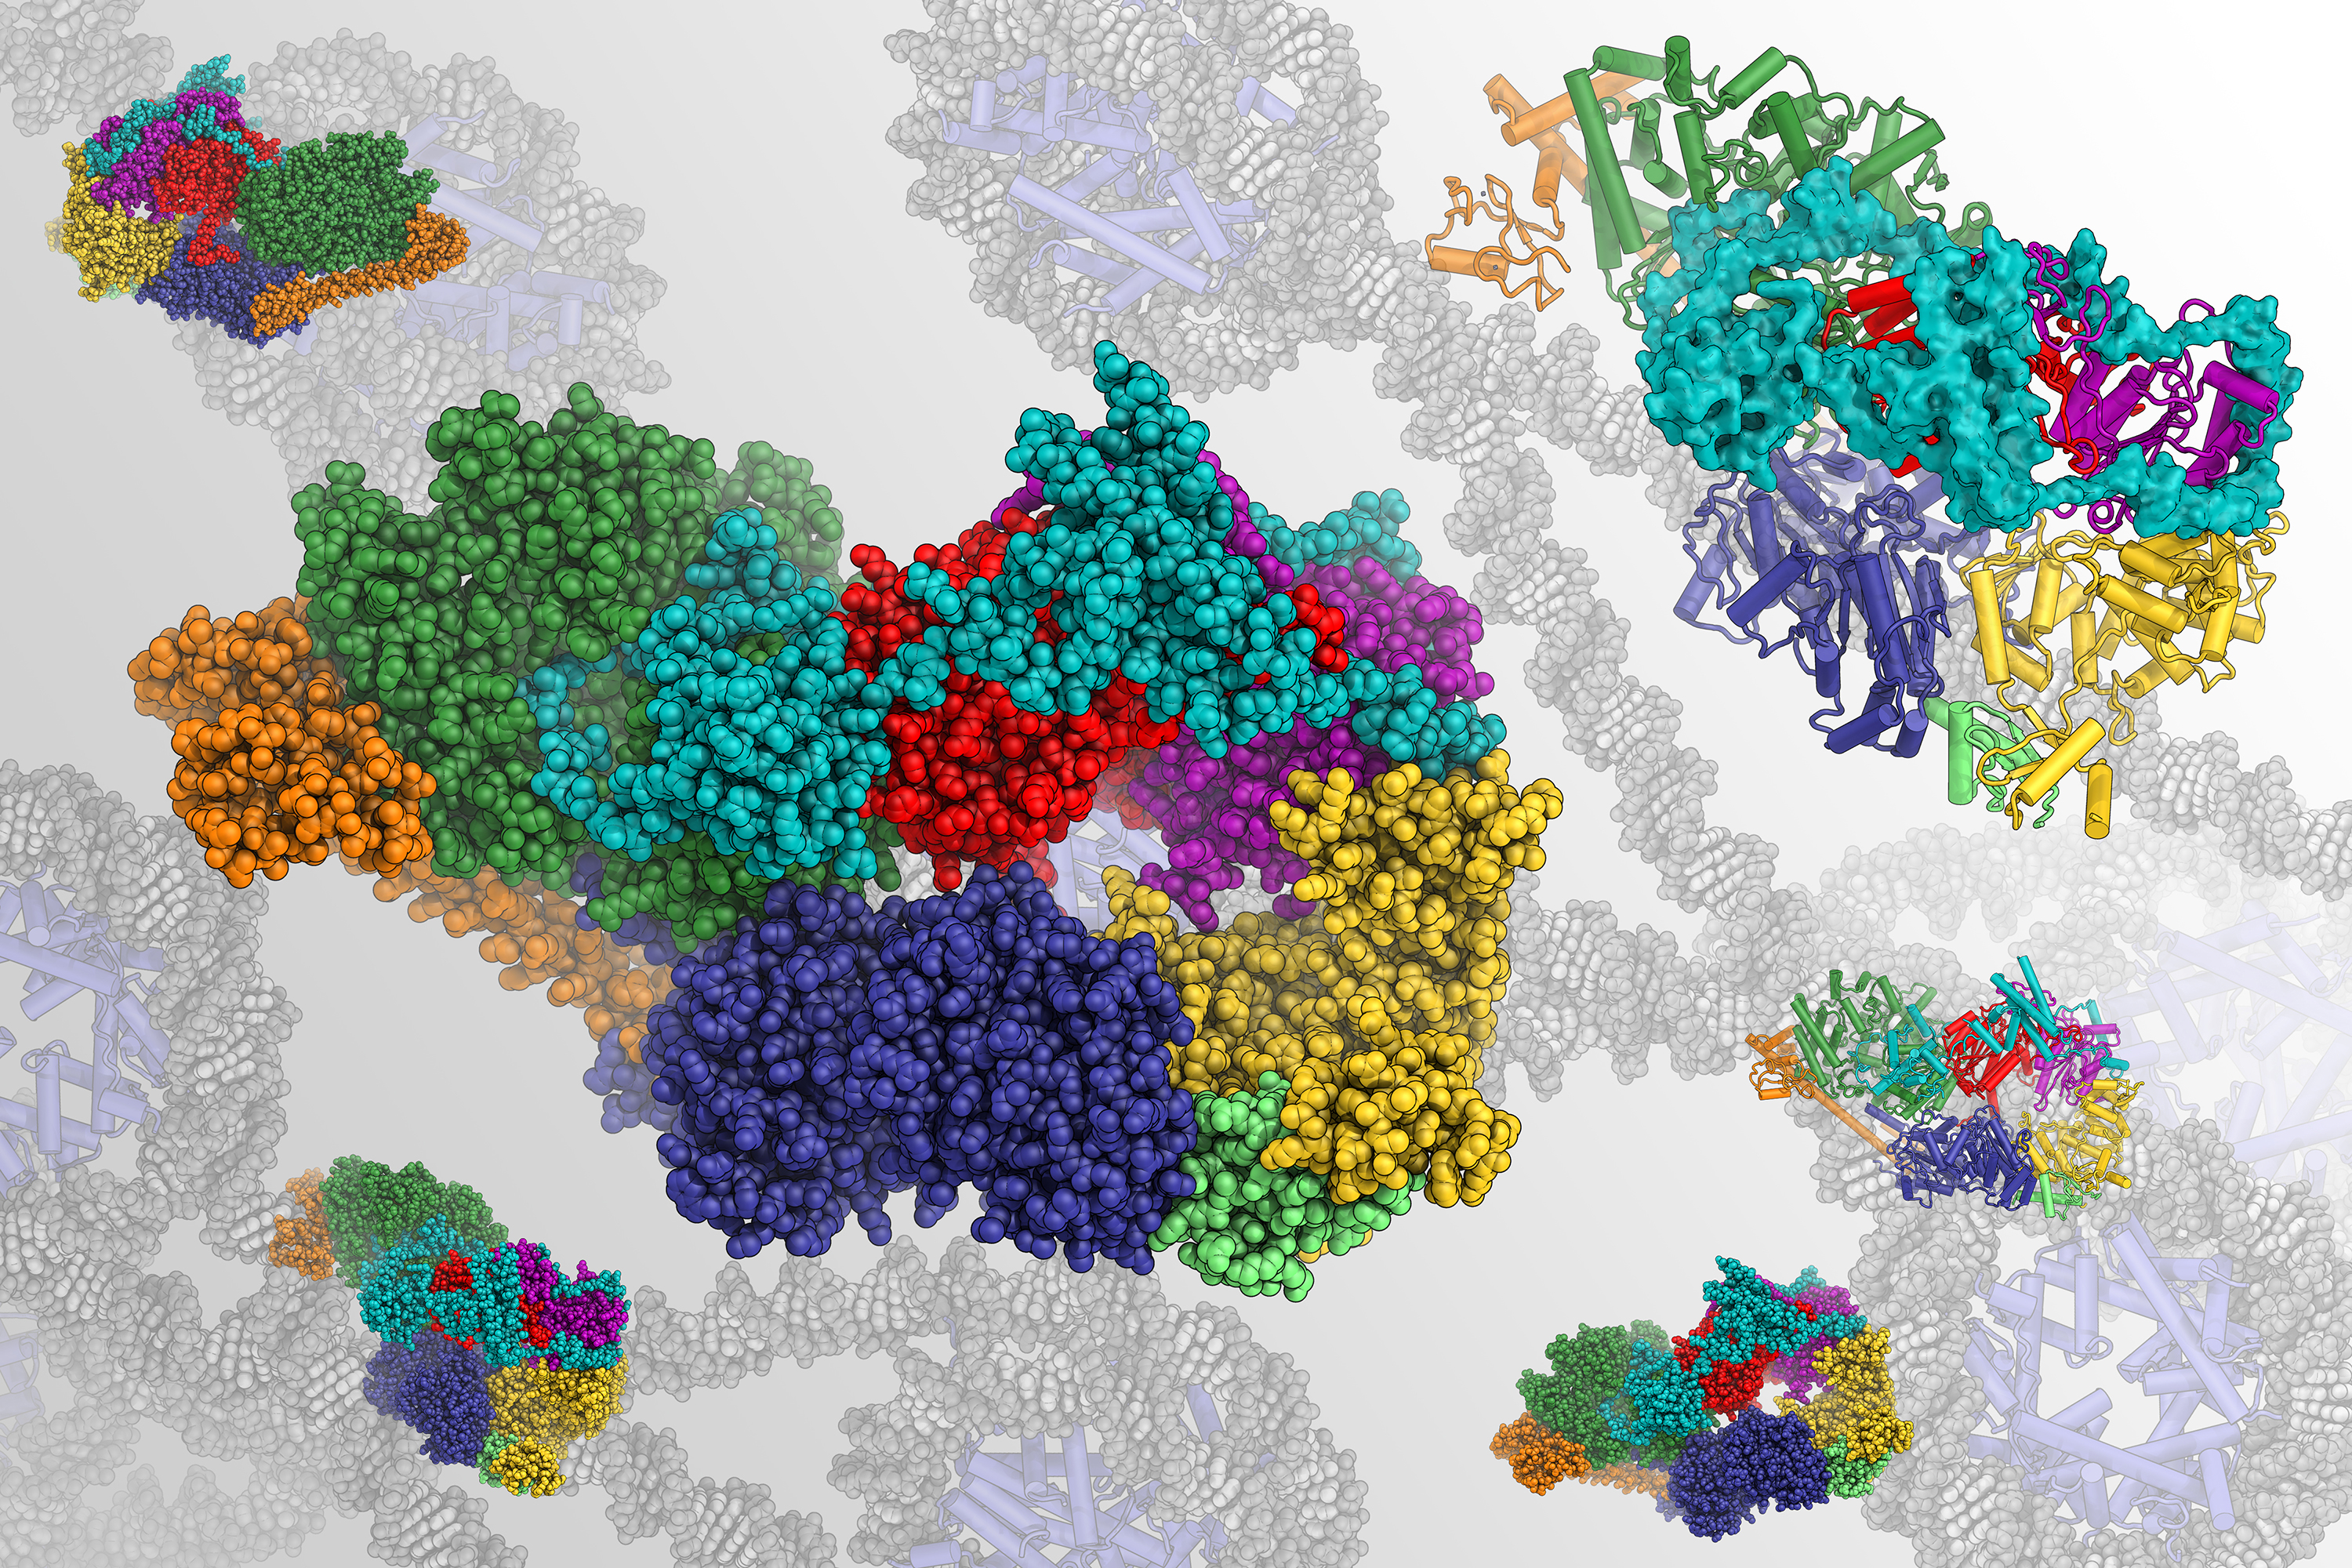 Structure of human TFIIH, a large protein assembly that acts to help repair and read our genome. Shown in the foreground is the a rendering of the overall architecture, and in the background it interacts with DNA helices.